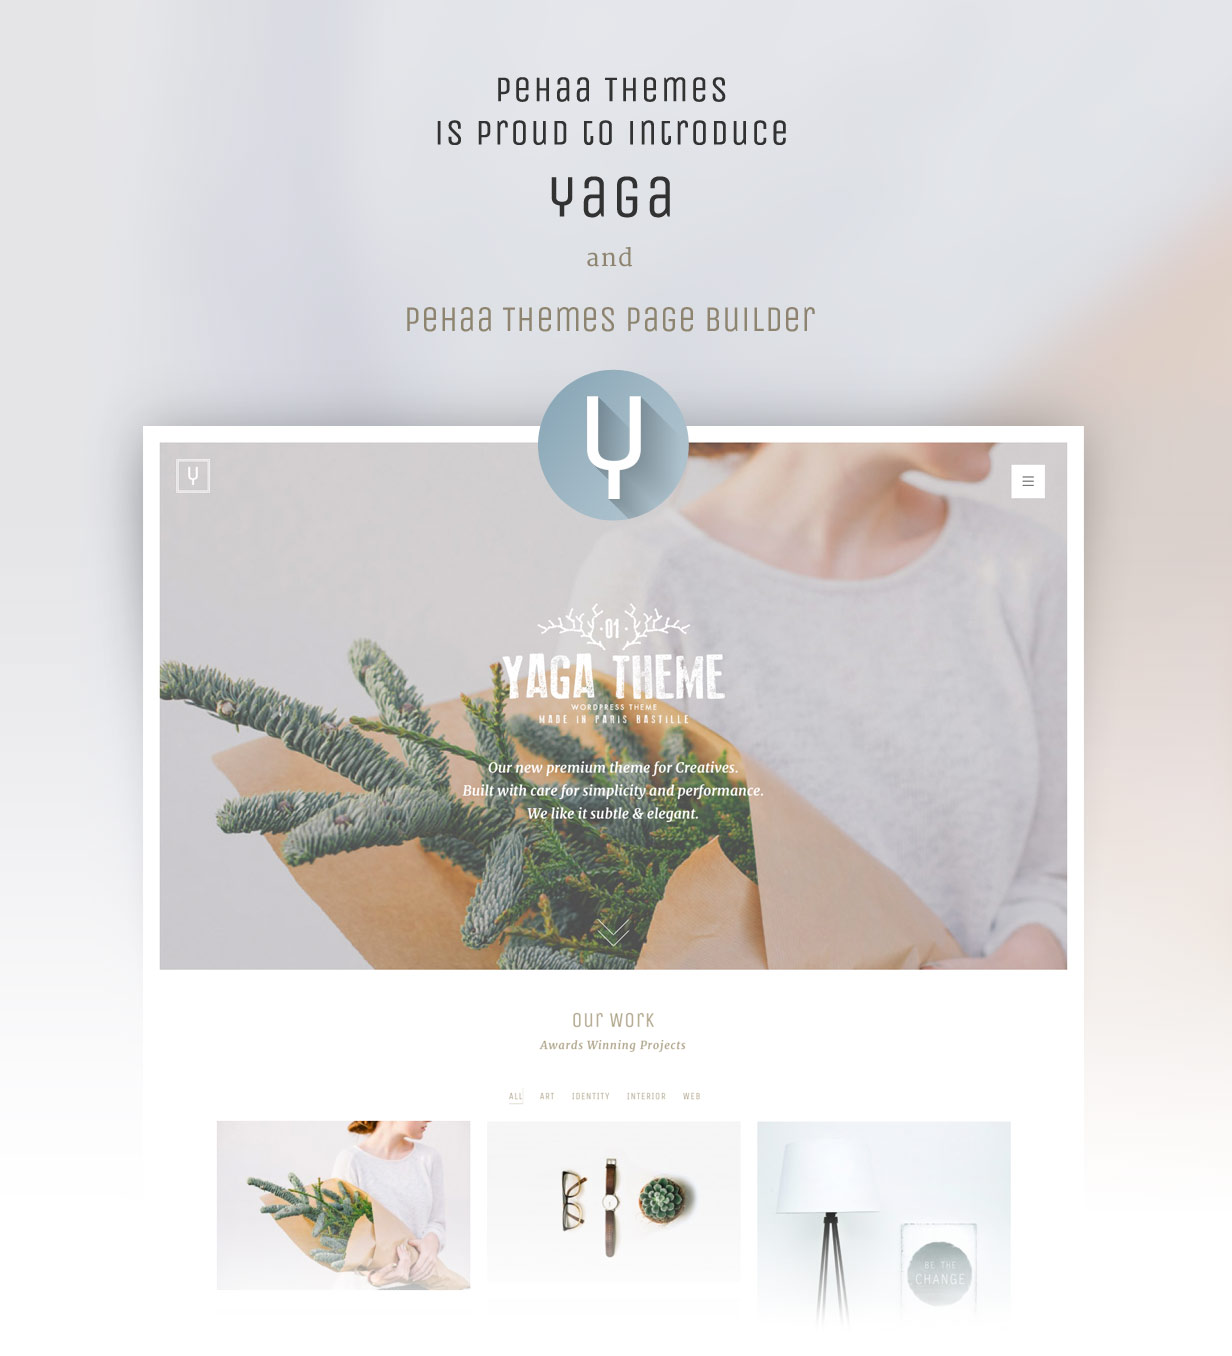 PeHaa Themes is proud to introduce their multipurpose WP theme - Yaga and PeHaa Themes Page Builder. Built with care for simplicity, web performance and visual appeal, coded in compliance with W3C and WordPress coding standards. WordPress, WooCommerce.